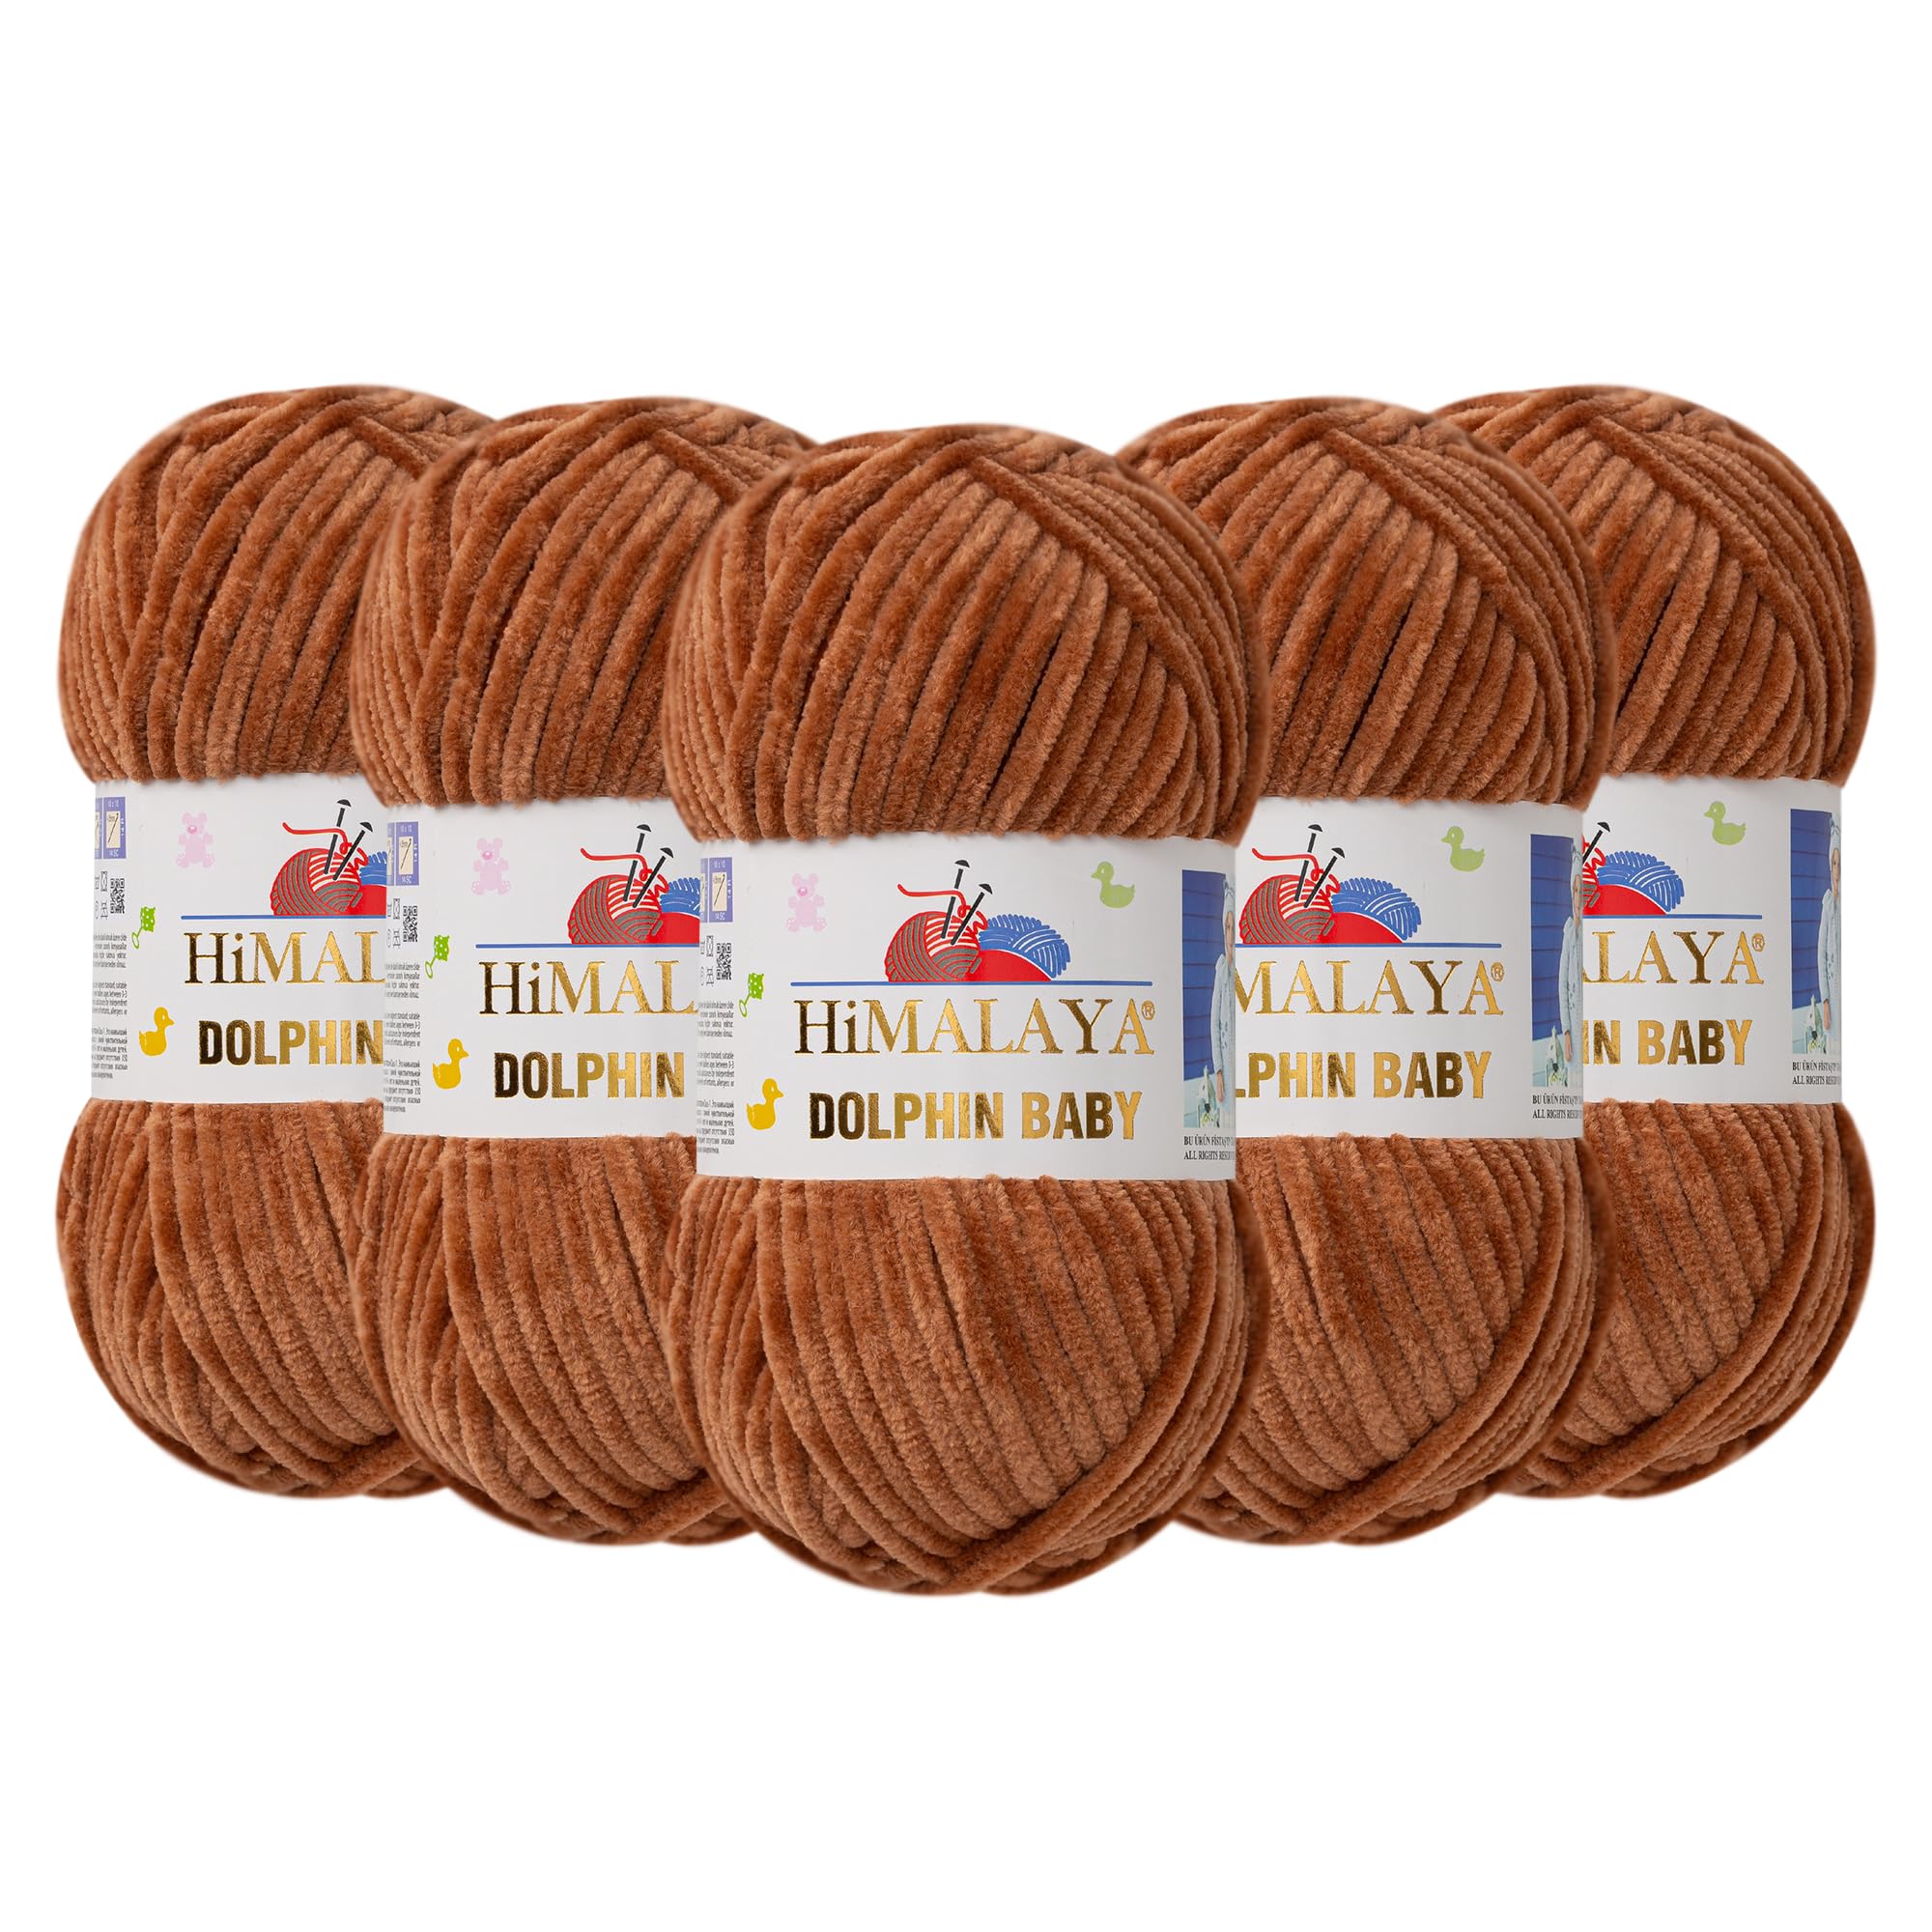 5 Knäuel (Packung) Himalaya Dolphin Baby Chenille-Garn, 100 % Polyester, jeder Strang 100 g, 120 m, 6: Super Bulky, Braun – 80337